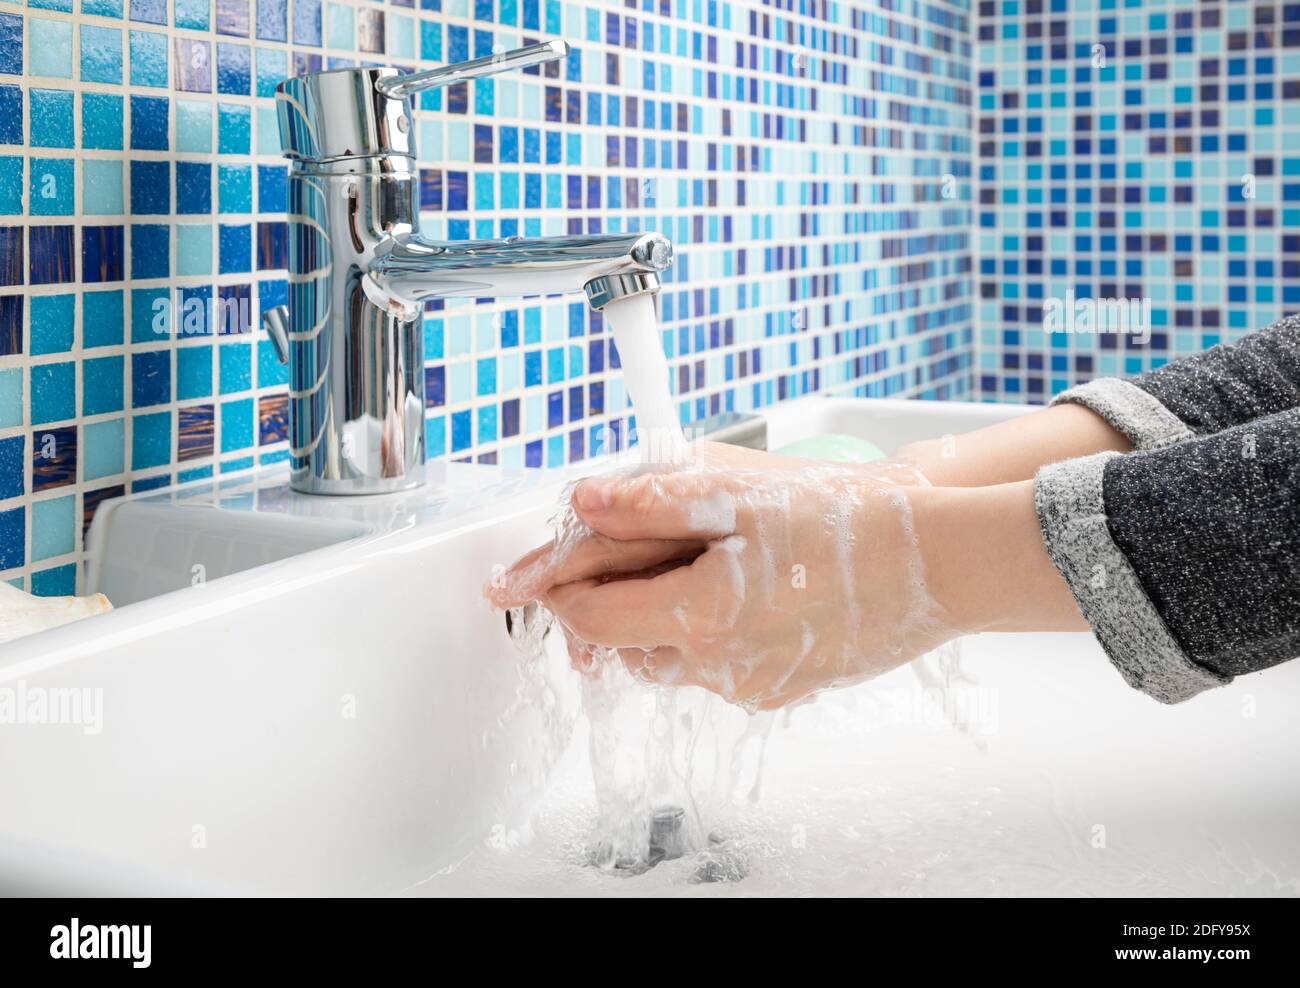 Child washing hands with antibacterial soap and water performing basic protective measures against spreading of coronavirus COVID-19 disease Stock Photo